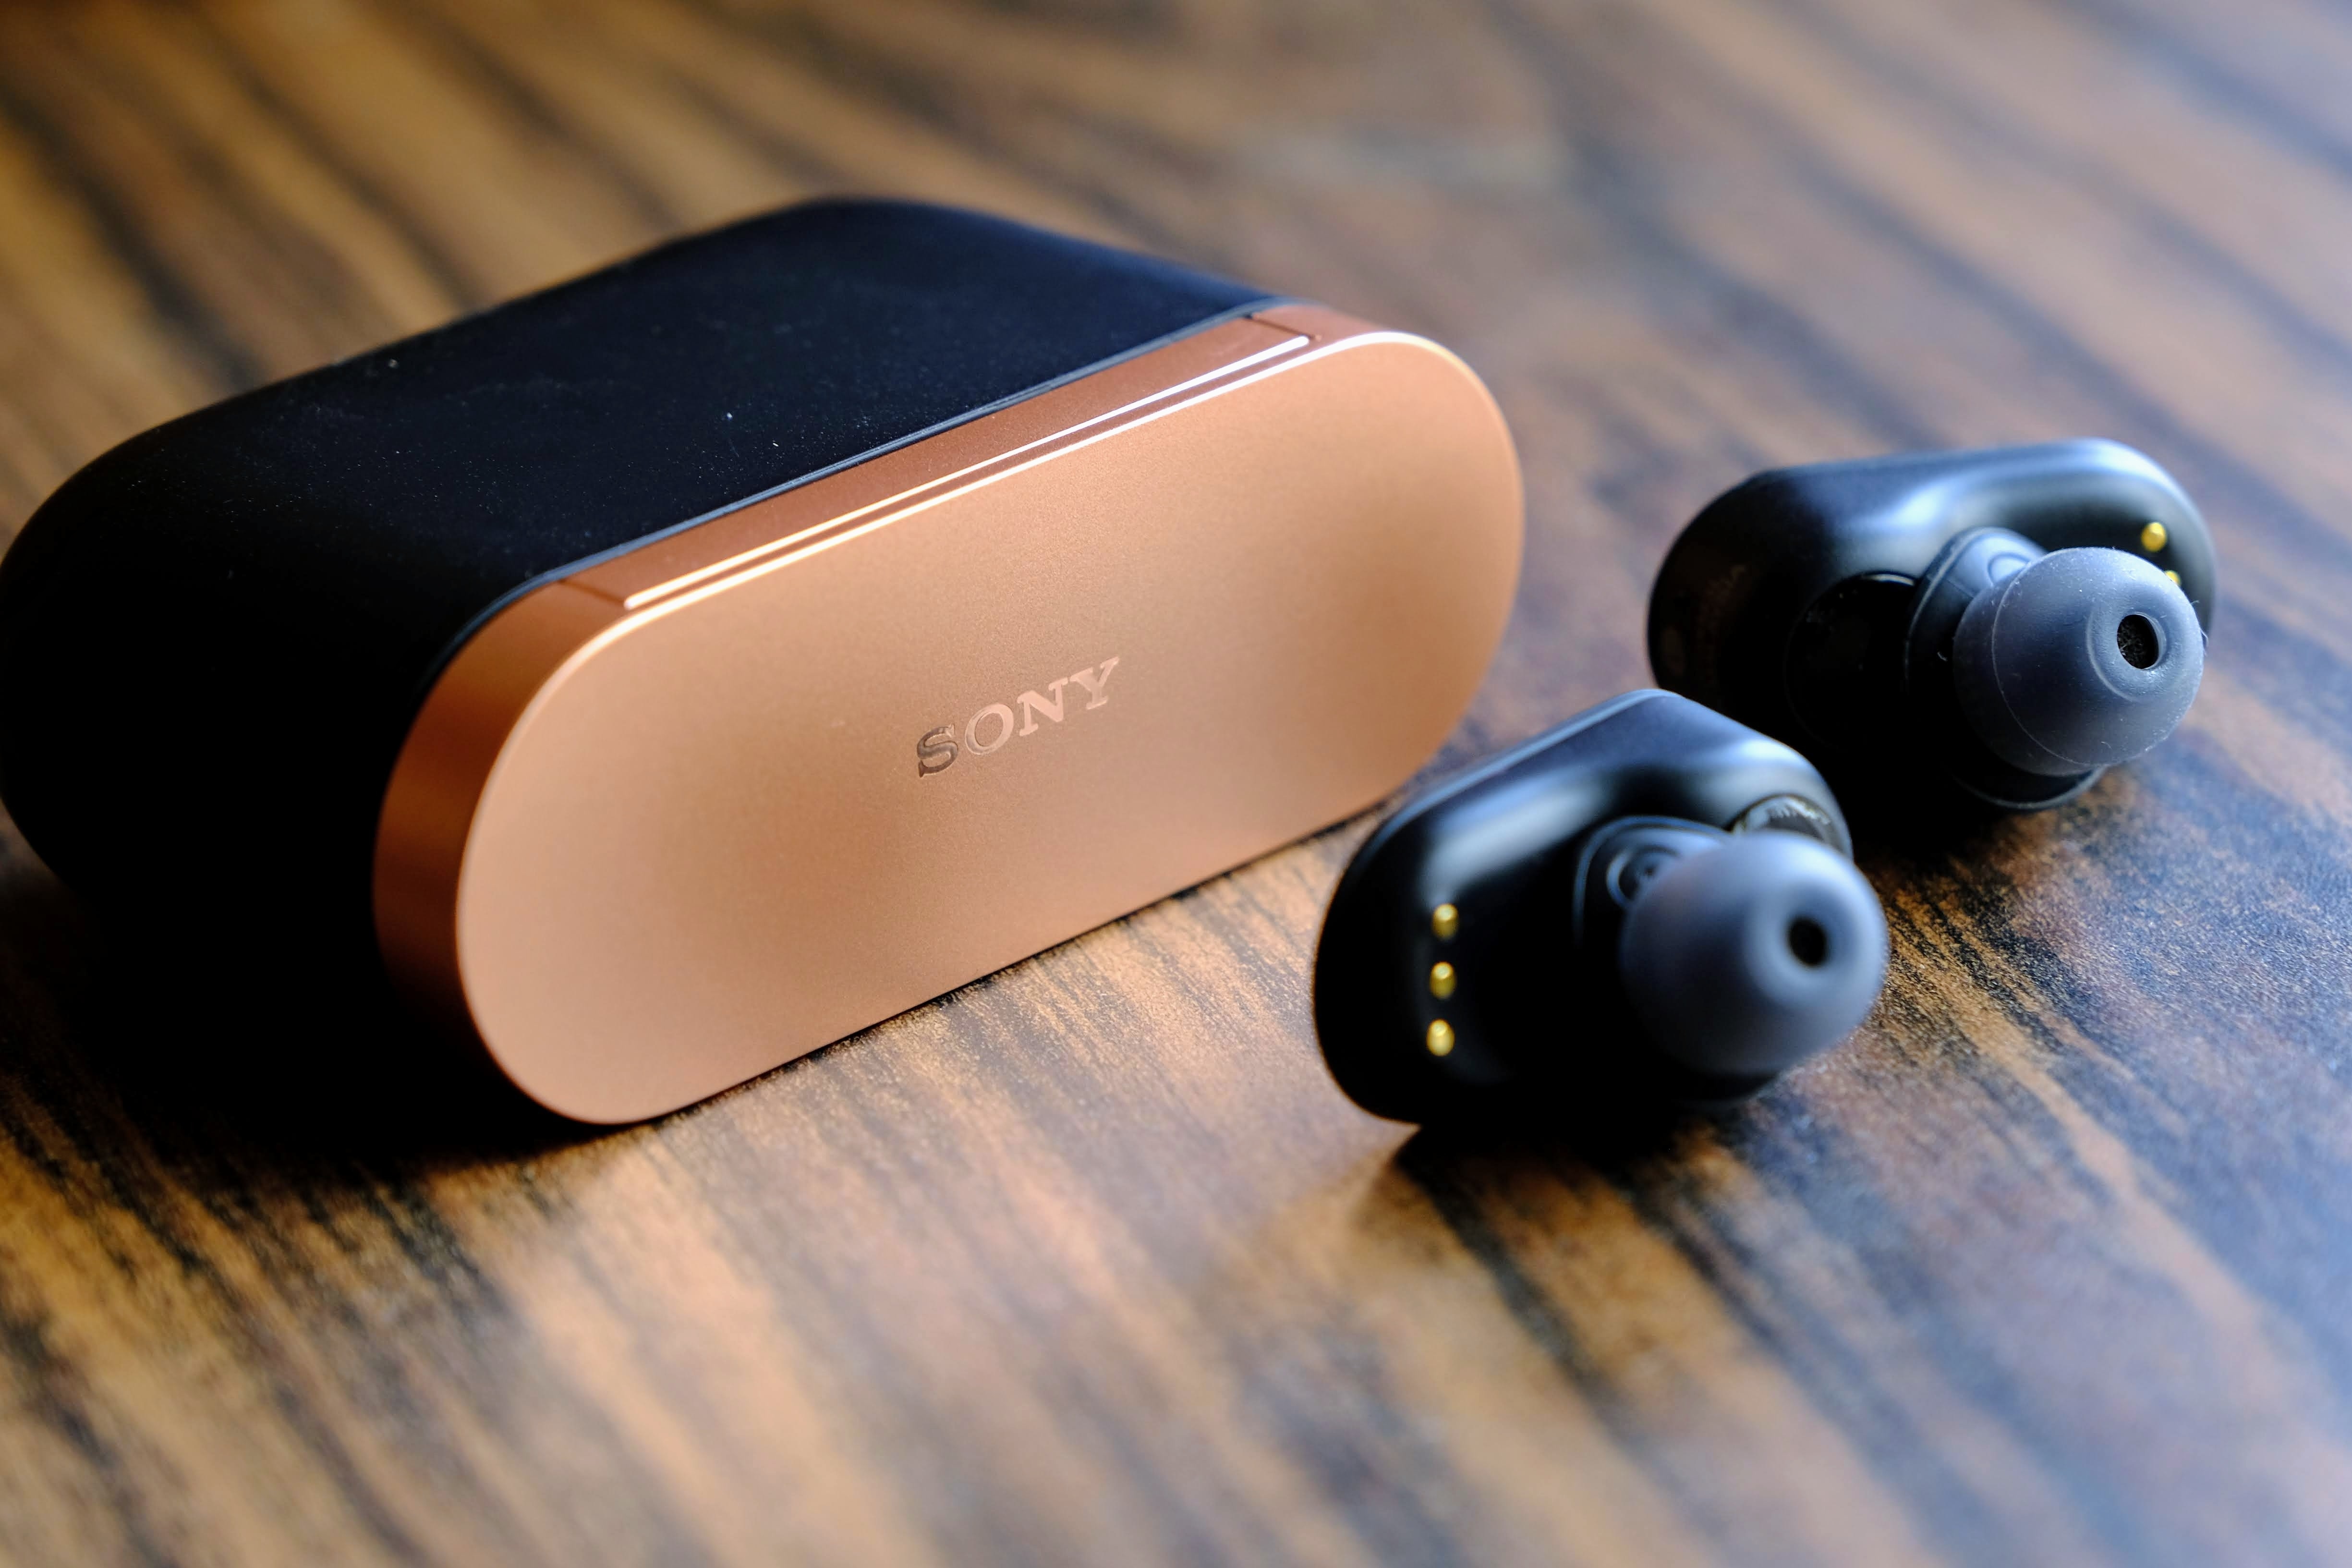 Sony WF-1000XM3 earbuds review: This flagship is not for everyone